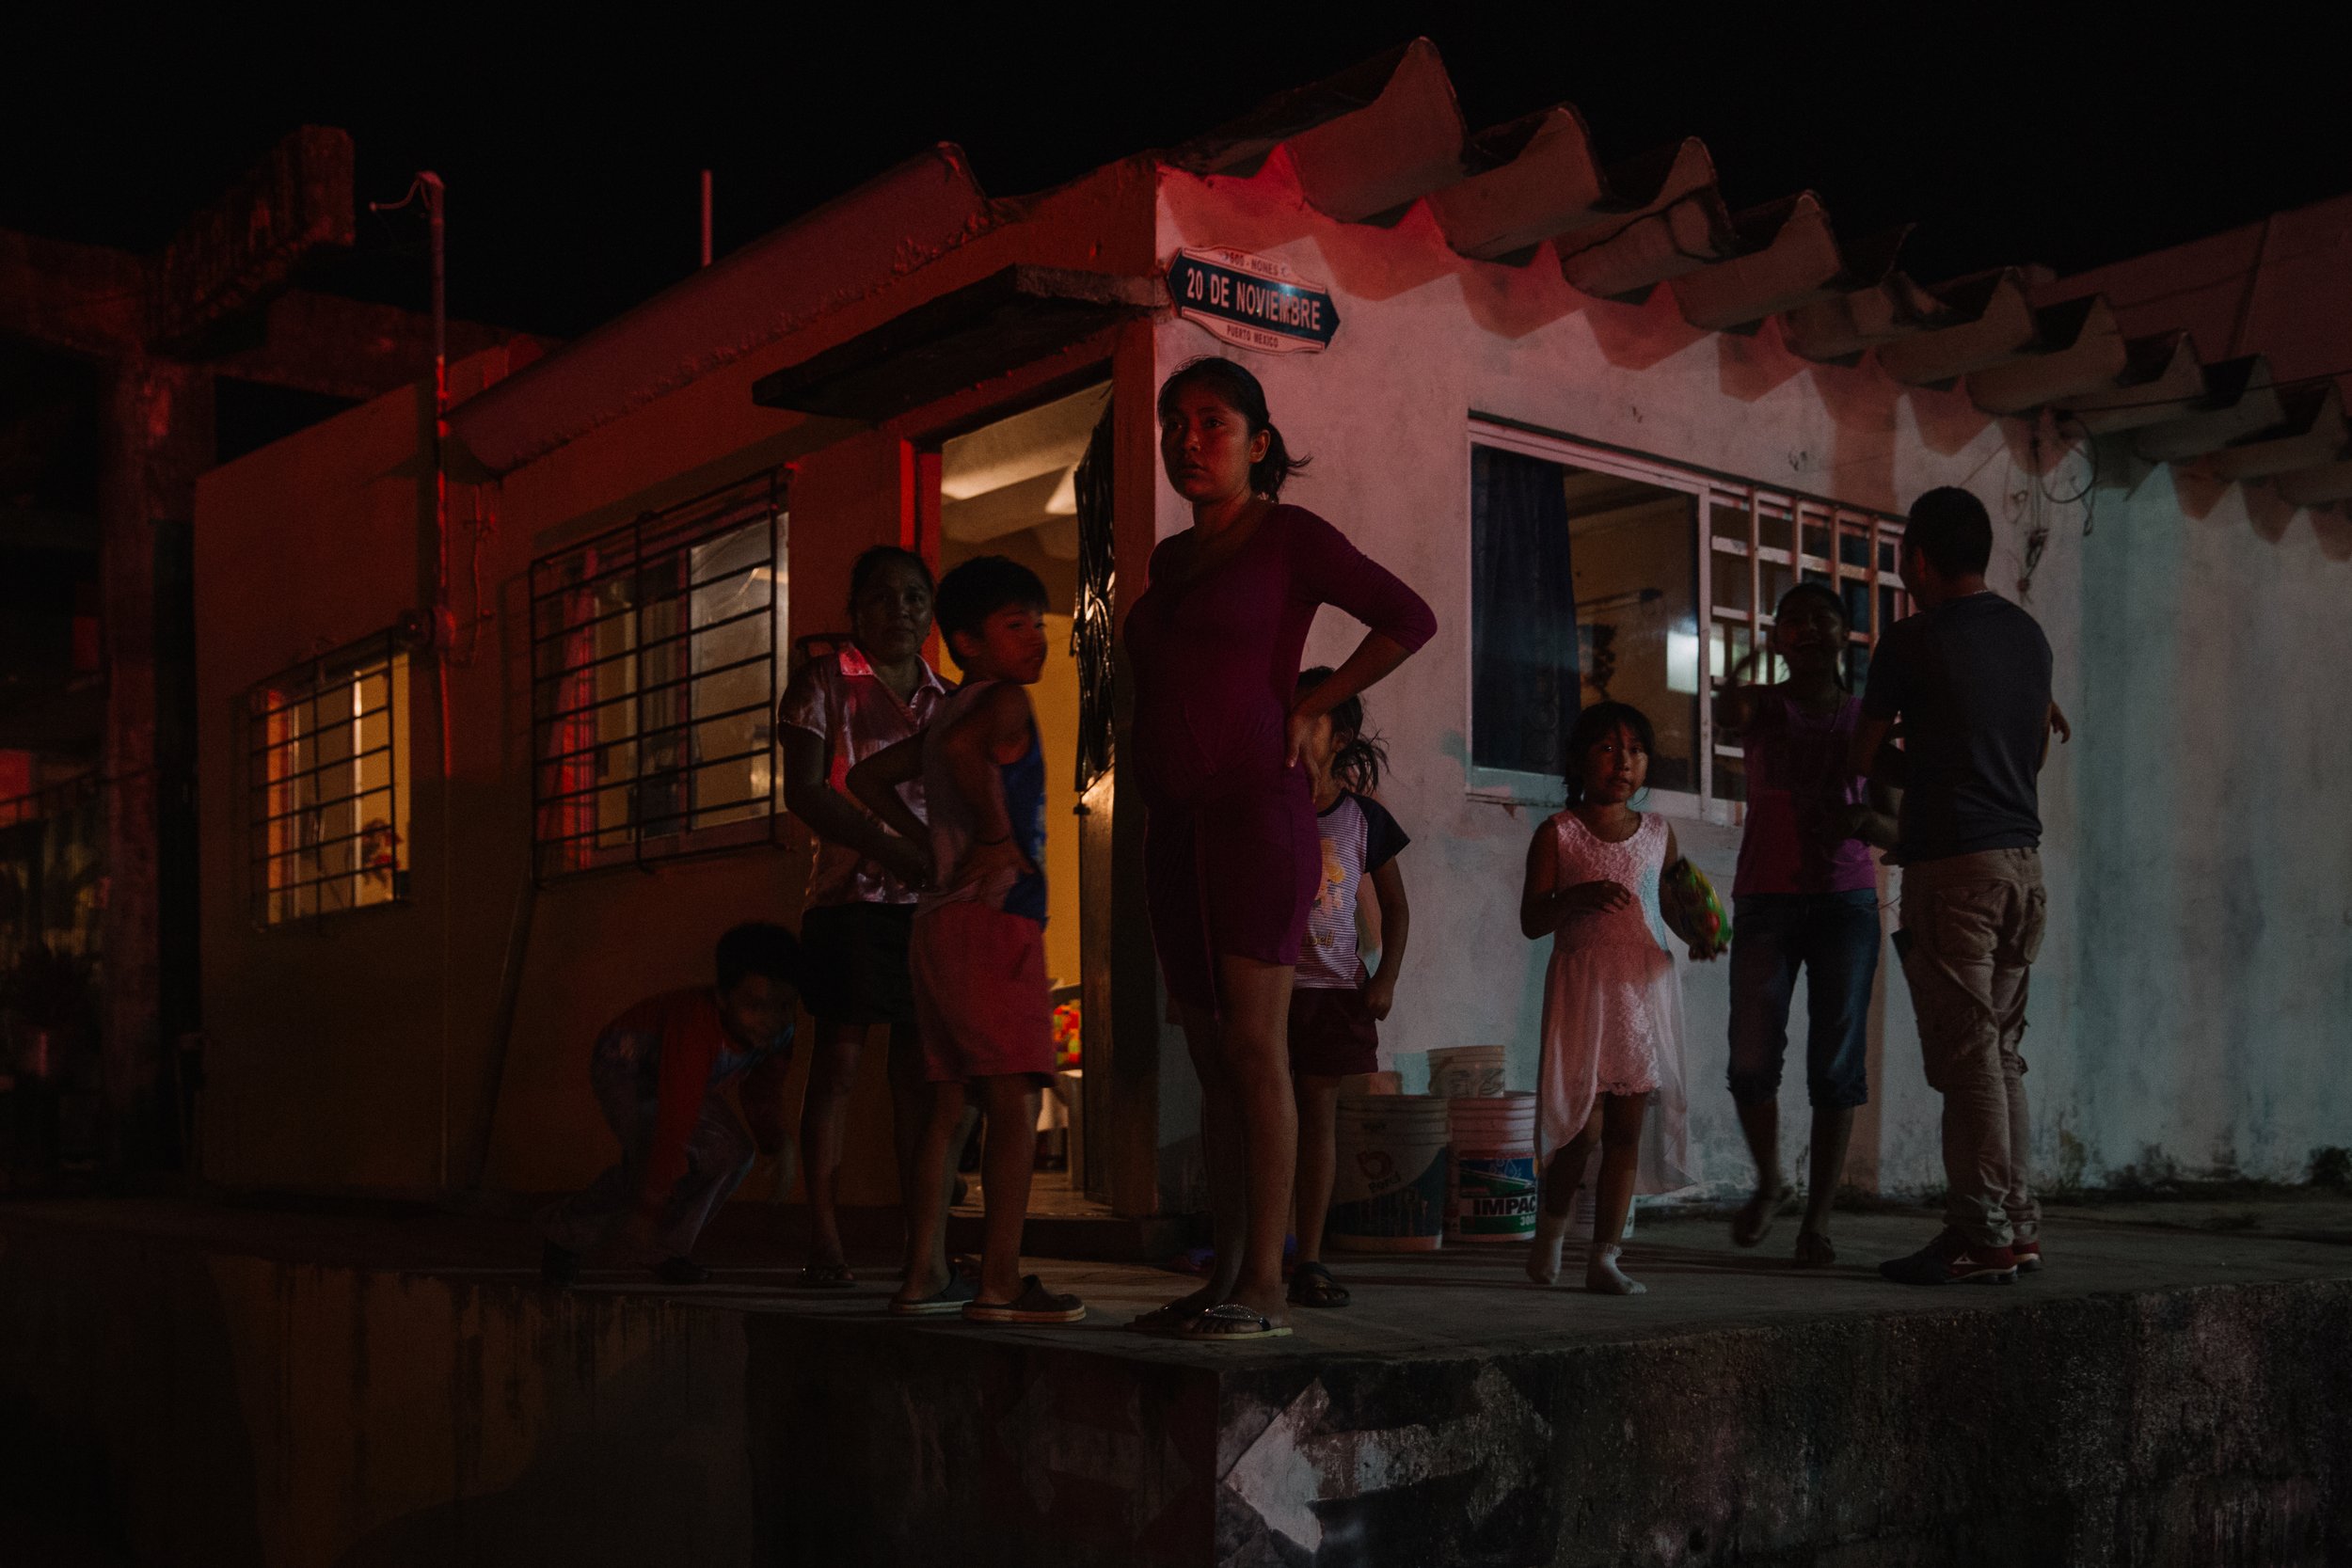  As night falls in Coatzacoalcos, Veracruz on November 18, 2016, a group of mothers take to the streets to call attention to the epidemic of disappearances in Mexico. Neighbors gather to watch and show support for the women, who have been searching f